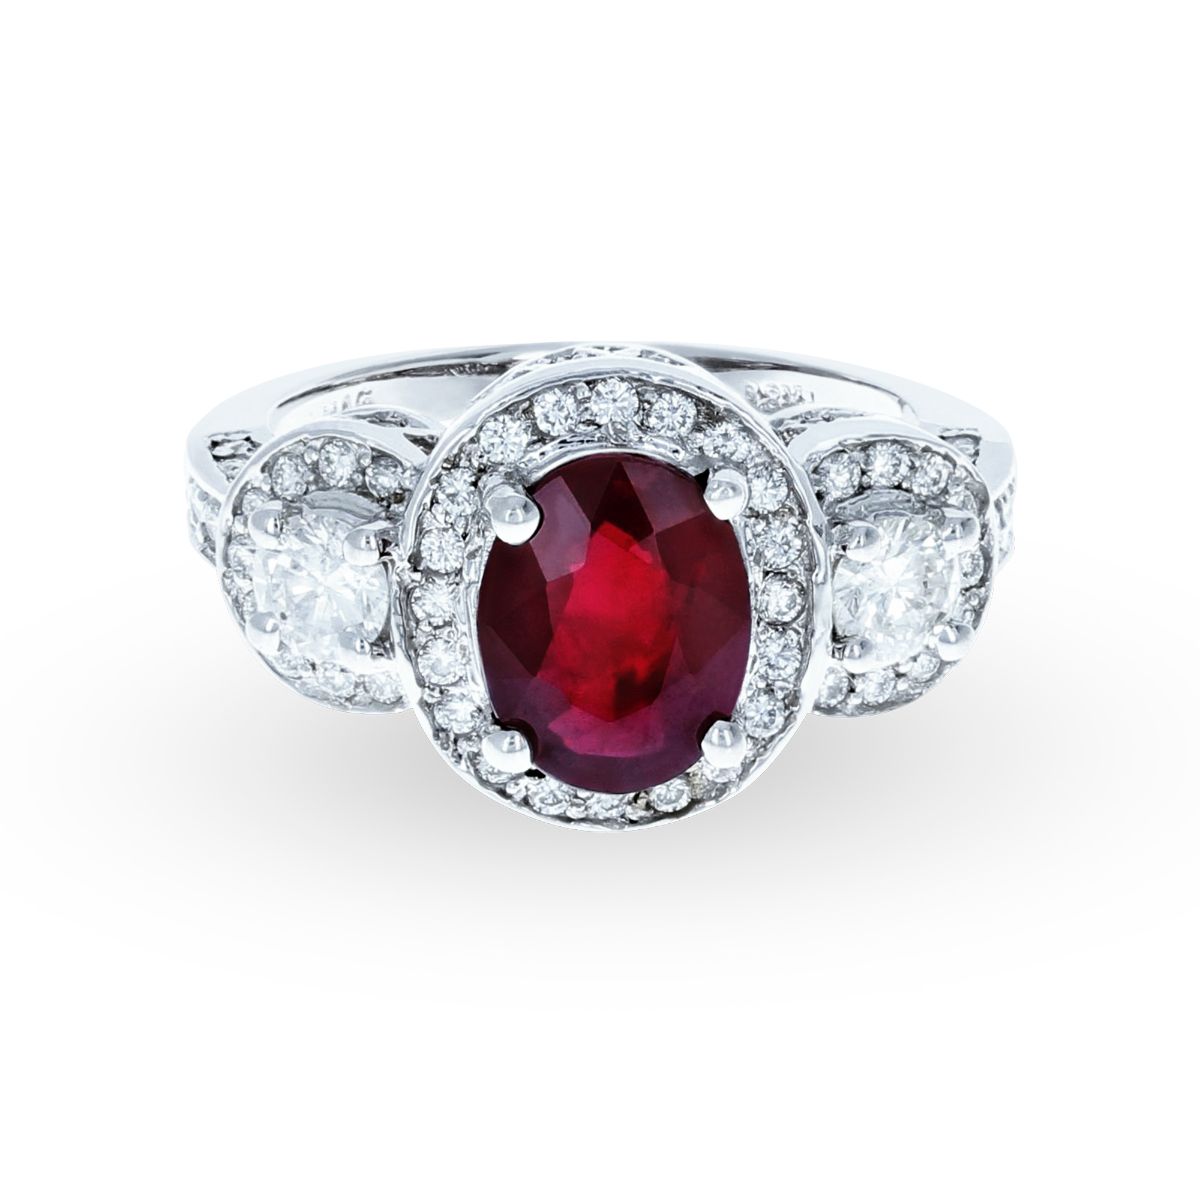 Antique-style Ruby Diamond Ring 18KT